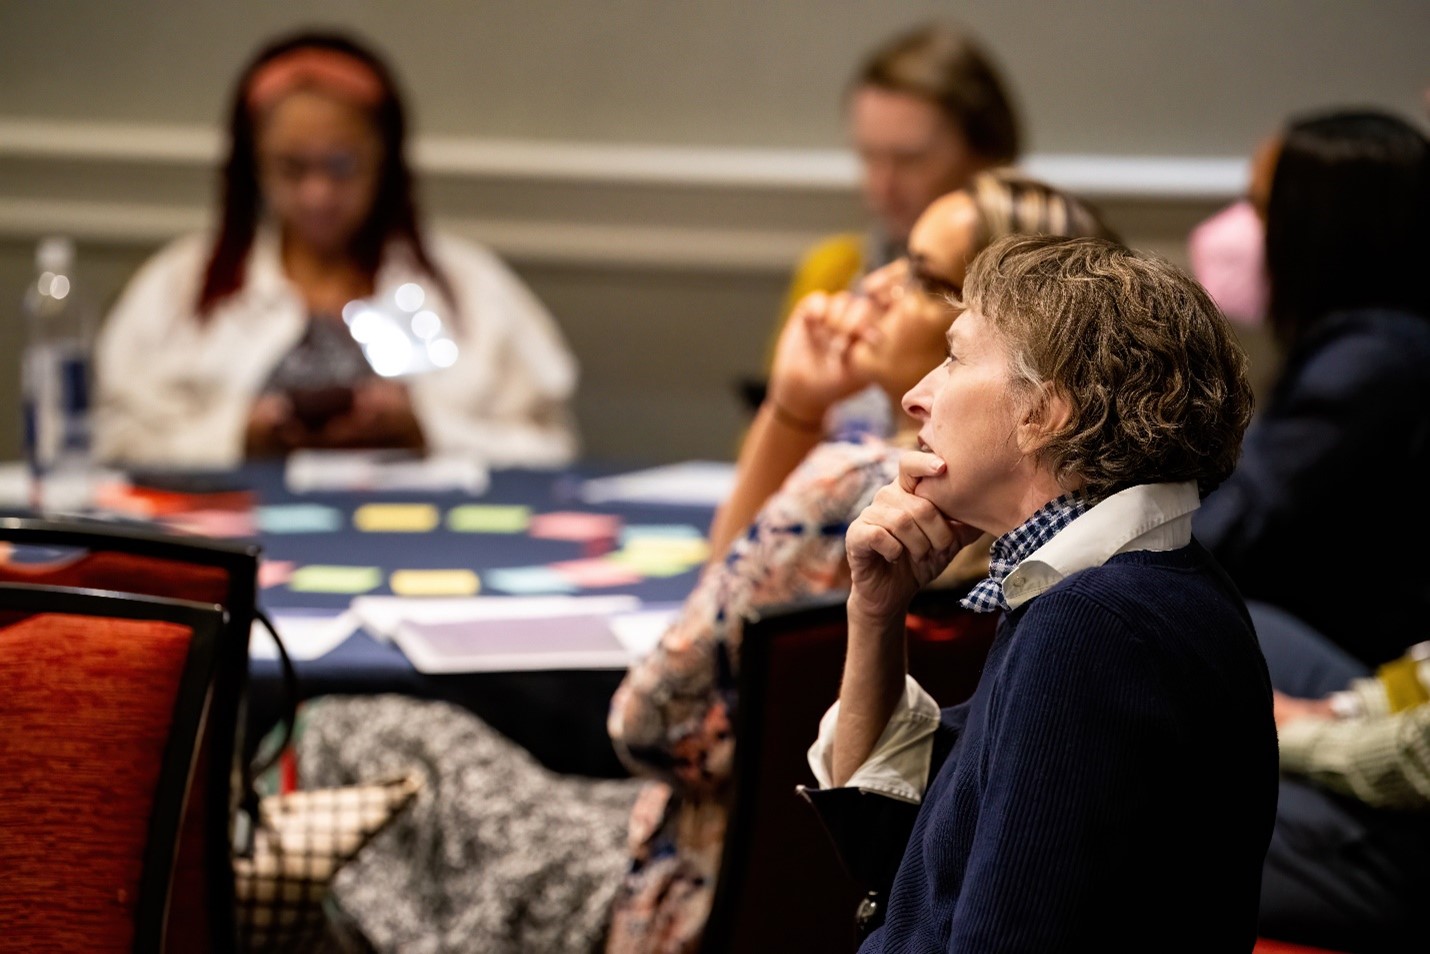 Attendees participated in interactive activities during the “Public Engagement Models for the Benefit of BRAIN Initiative Science” specialty session.